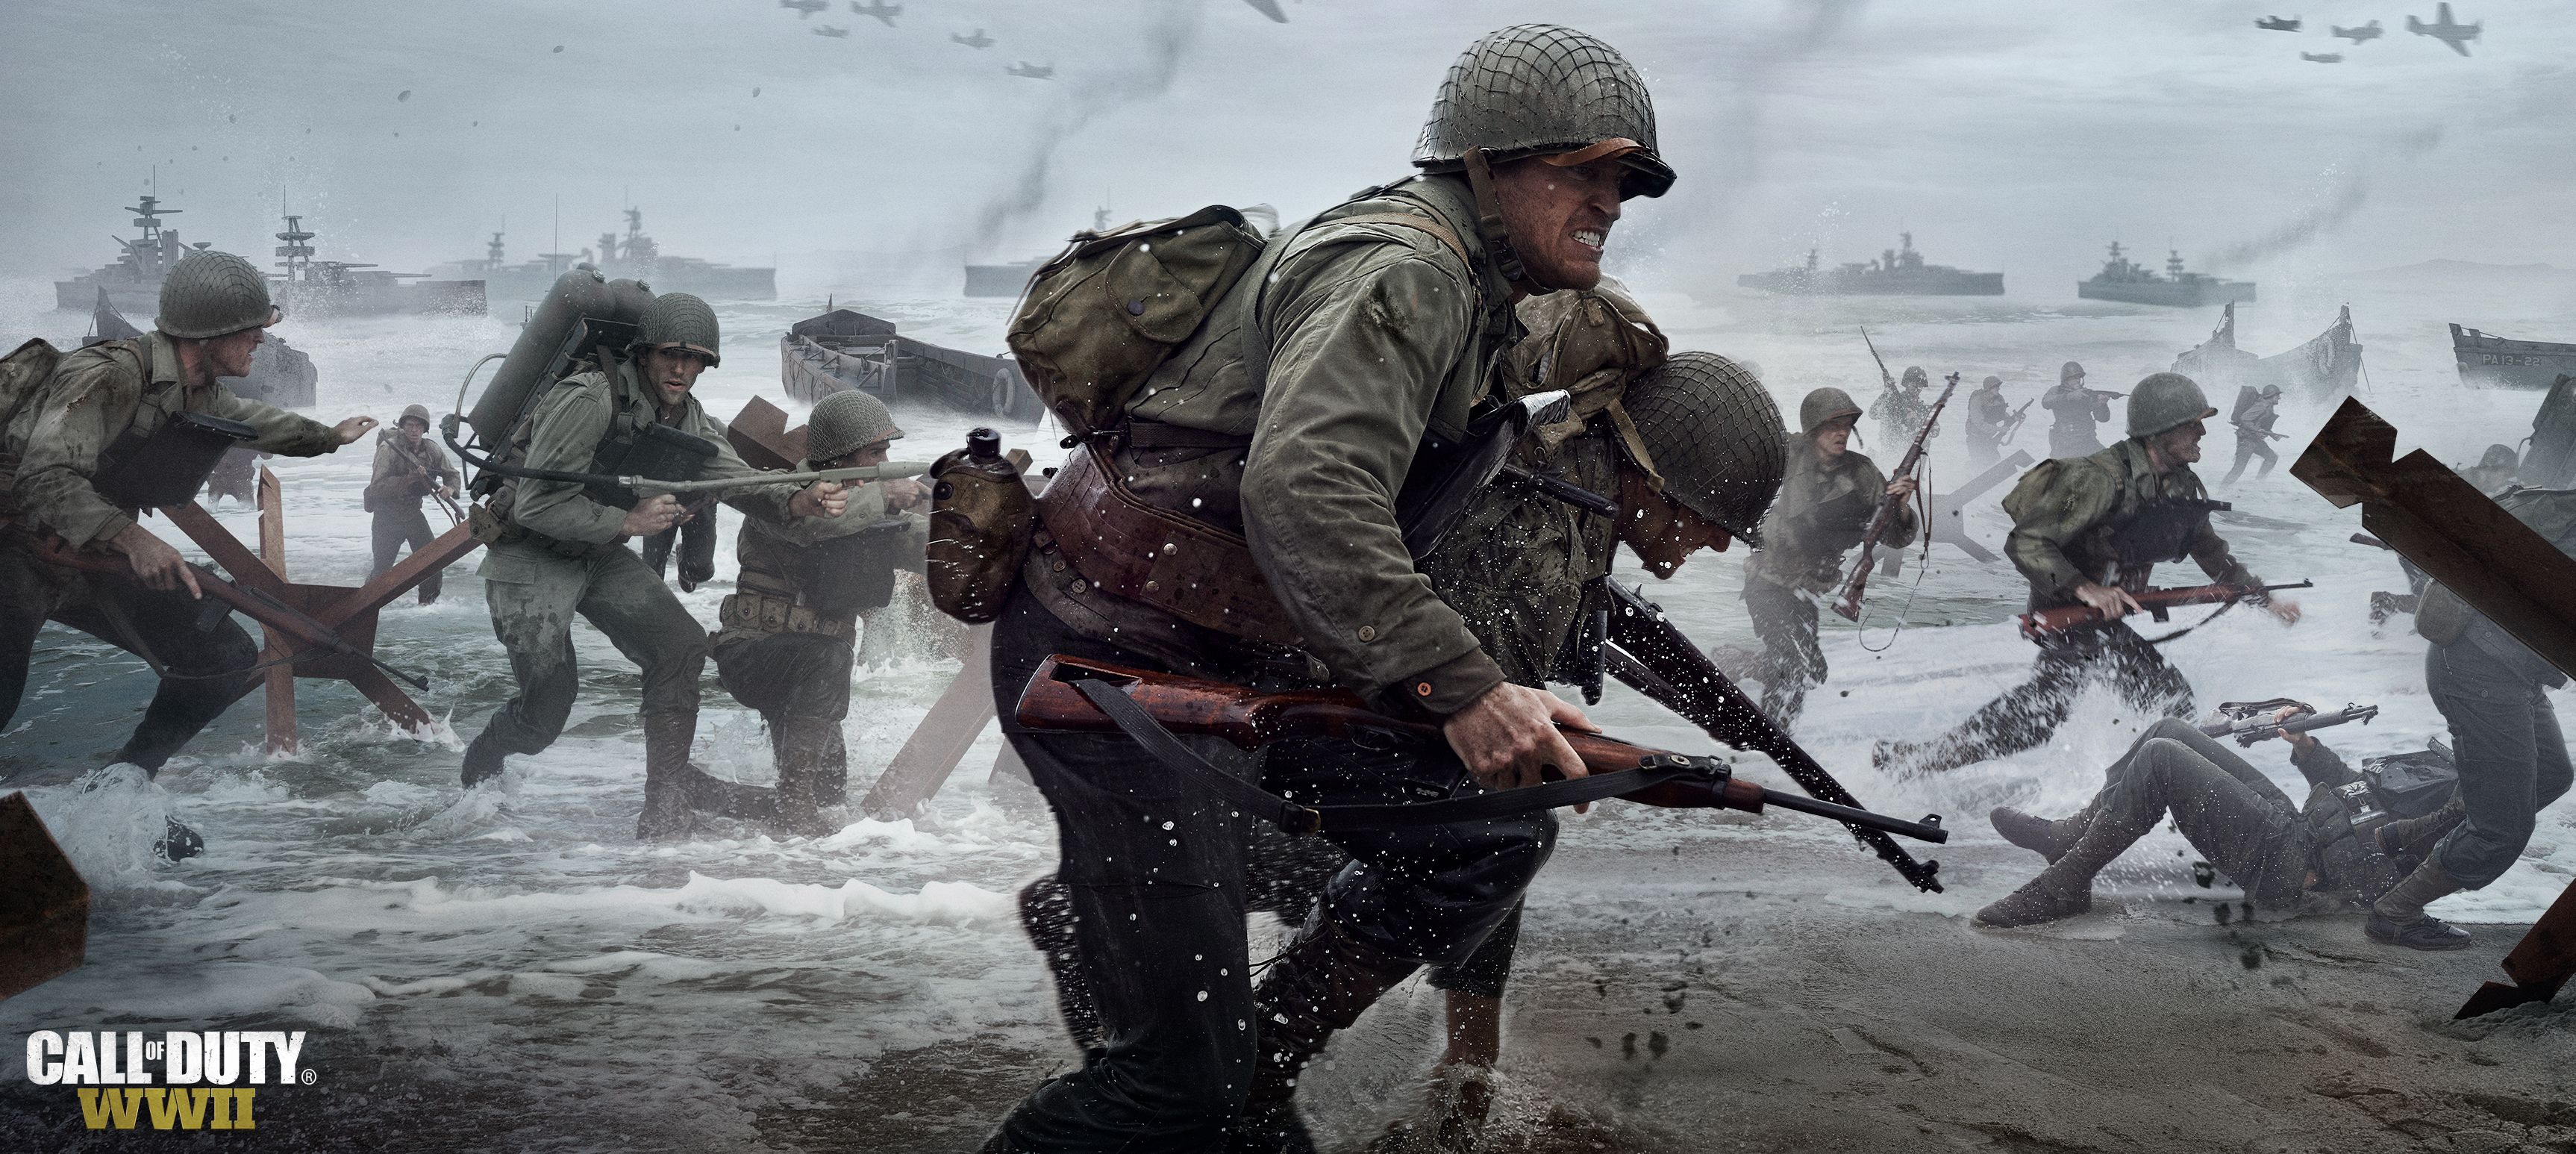 Four new Call of Duty: WWII trailers introduce the squad